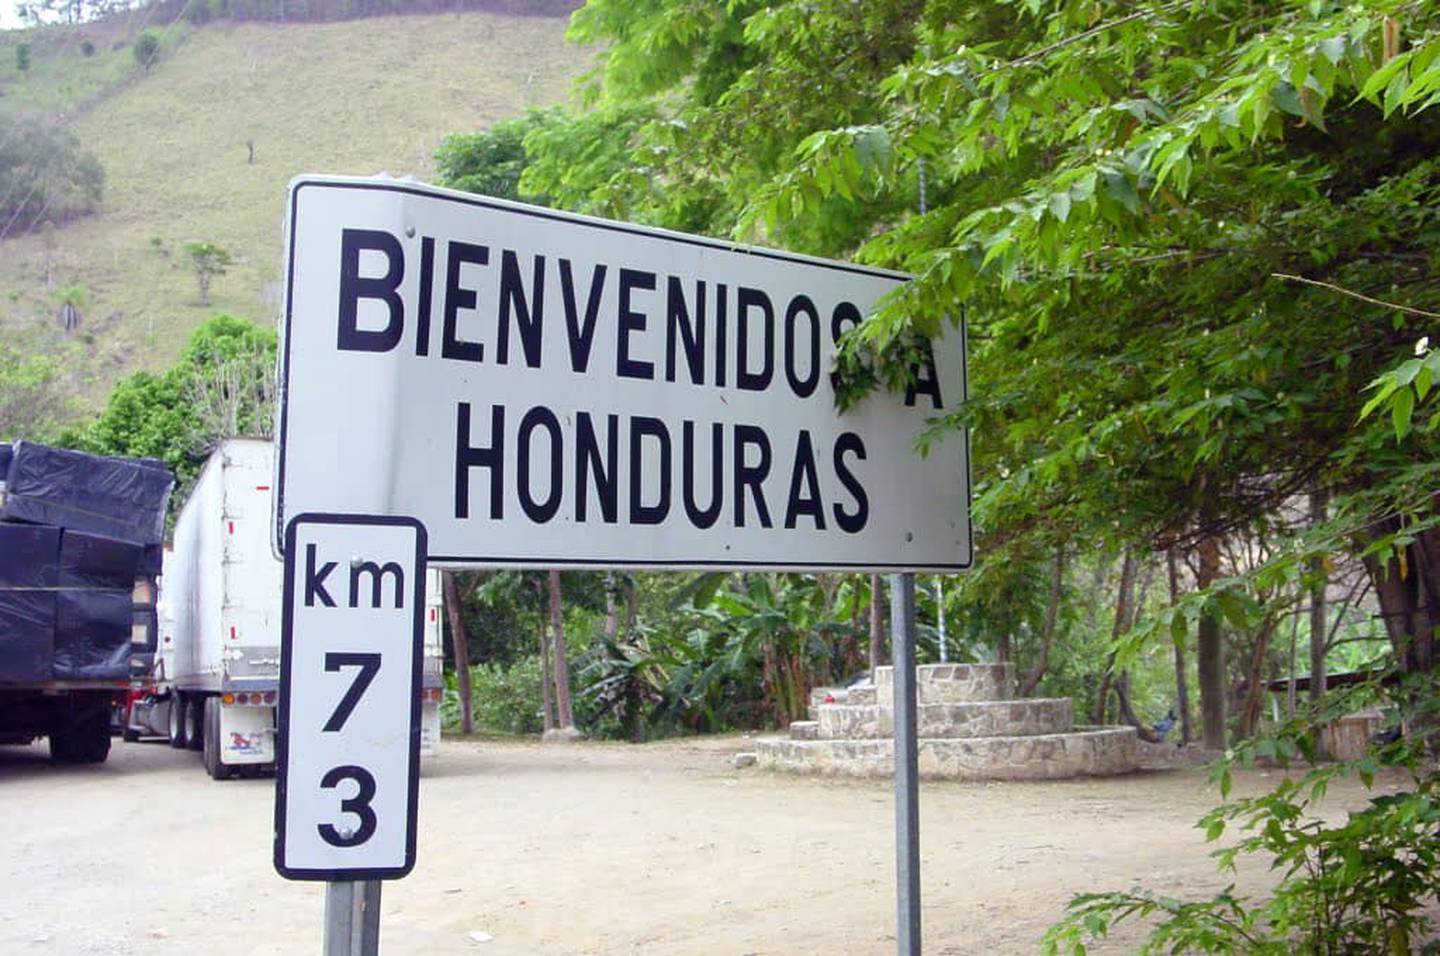 The OAS will contribute $100,000 to the project to assist deported migrants in the launching of their own businesses in Honduras